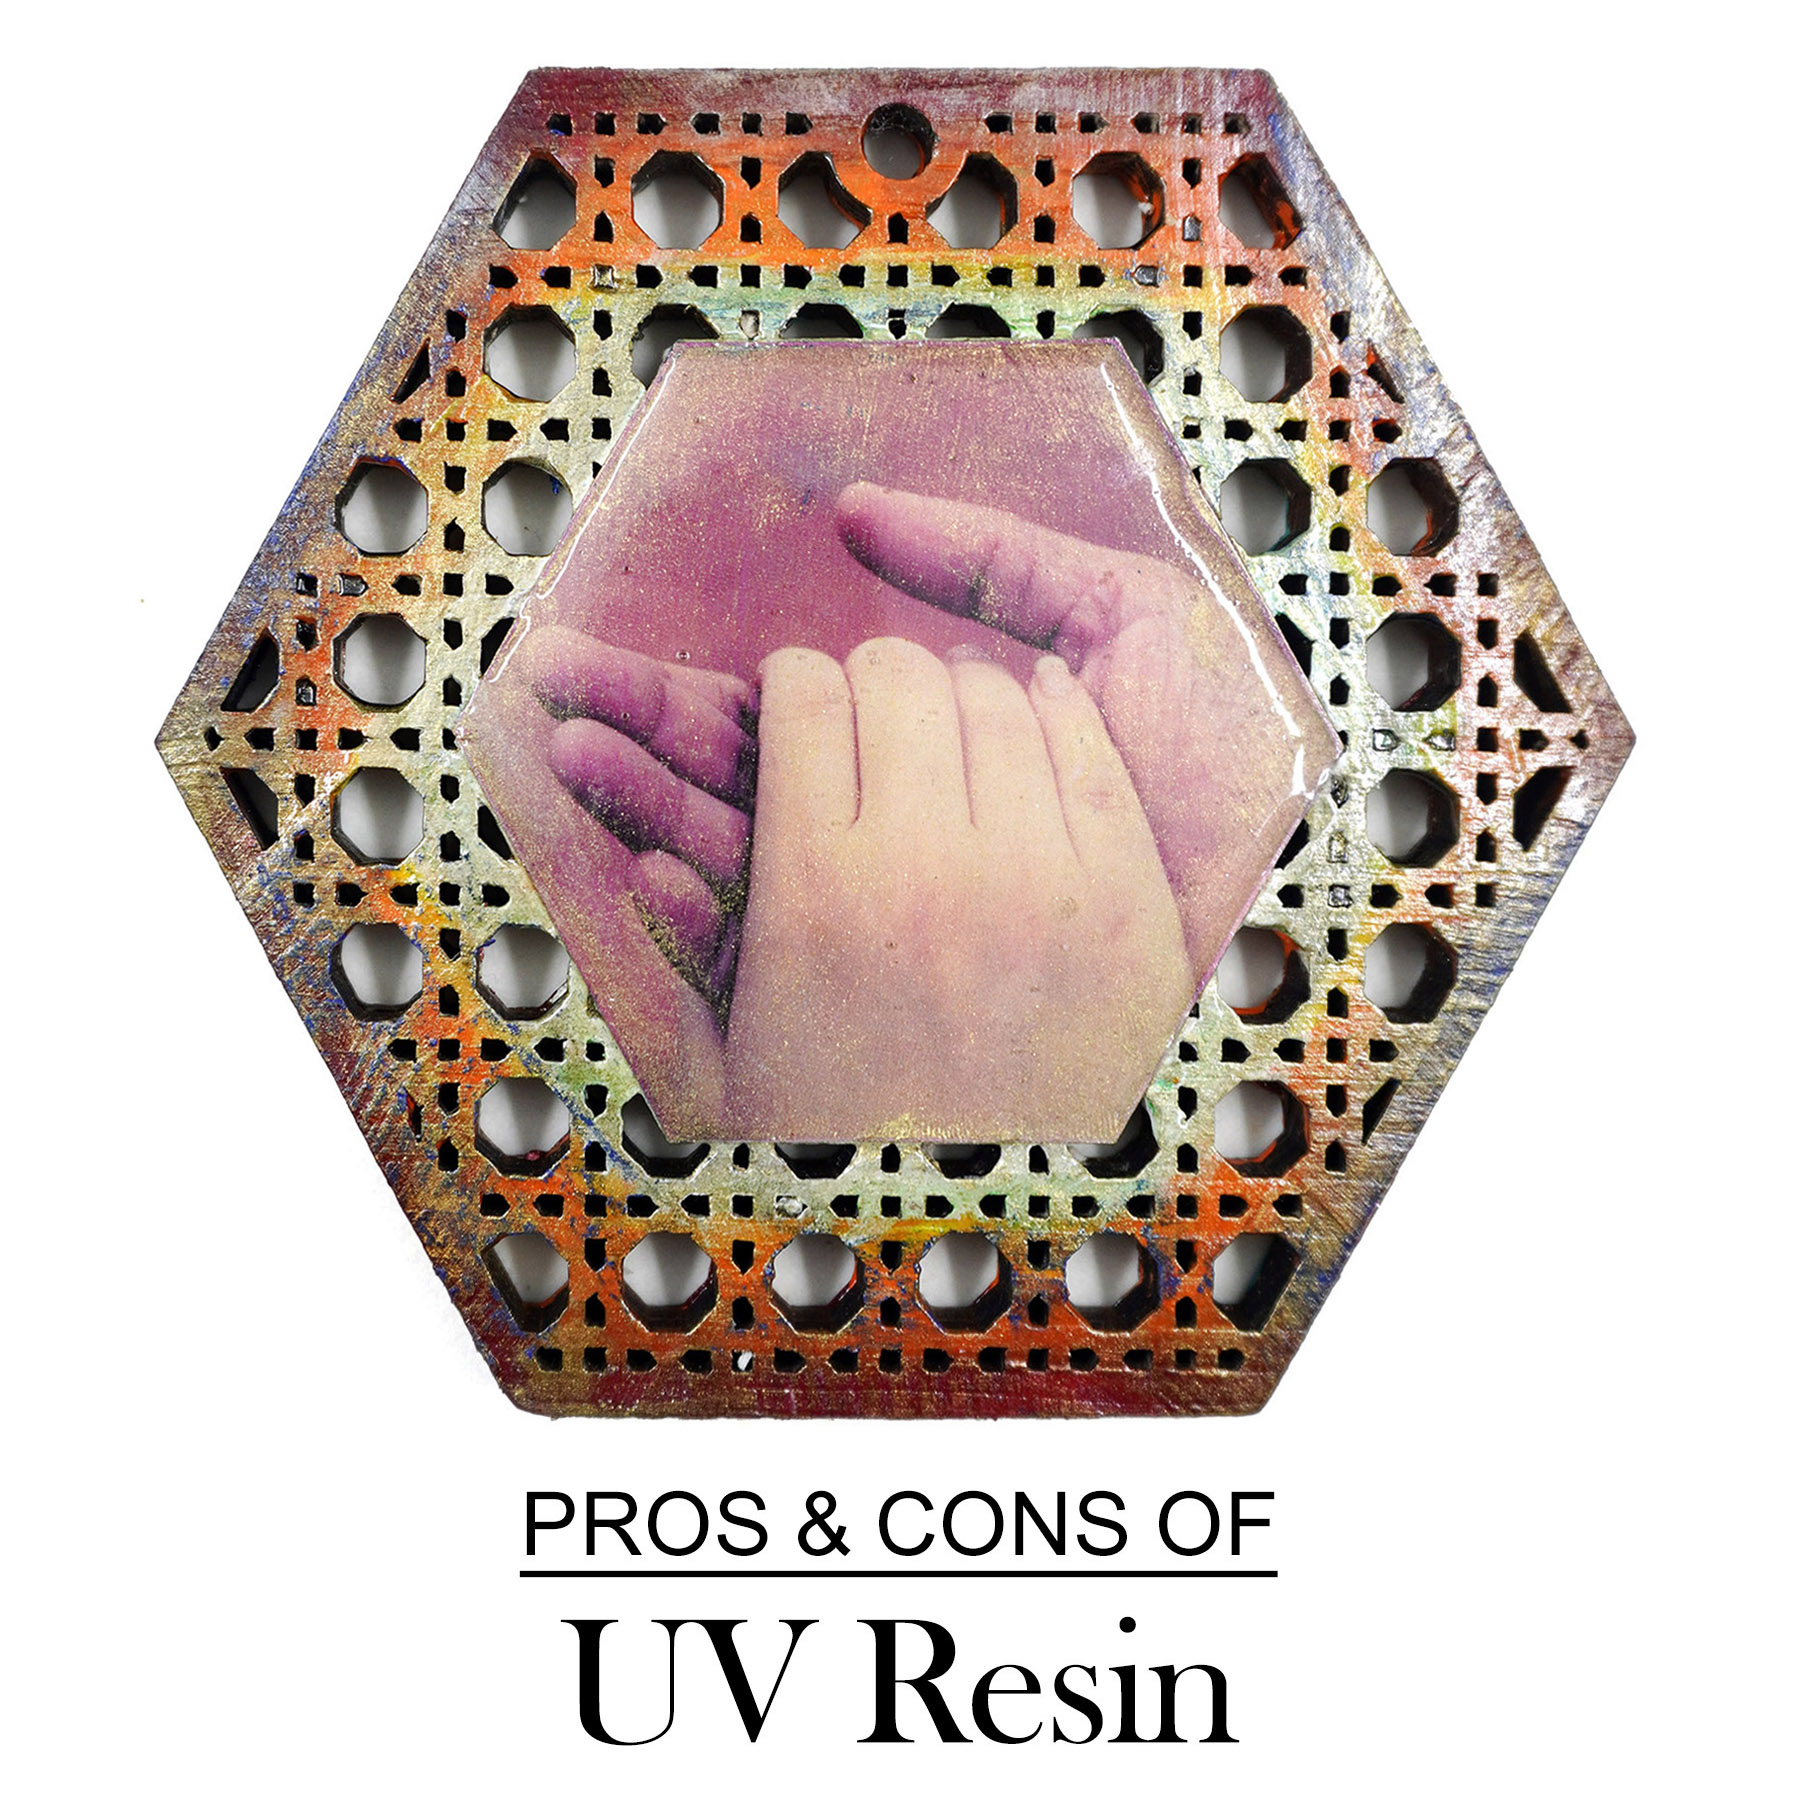 Pros and cons of UV Resin